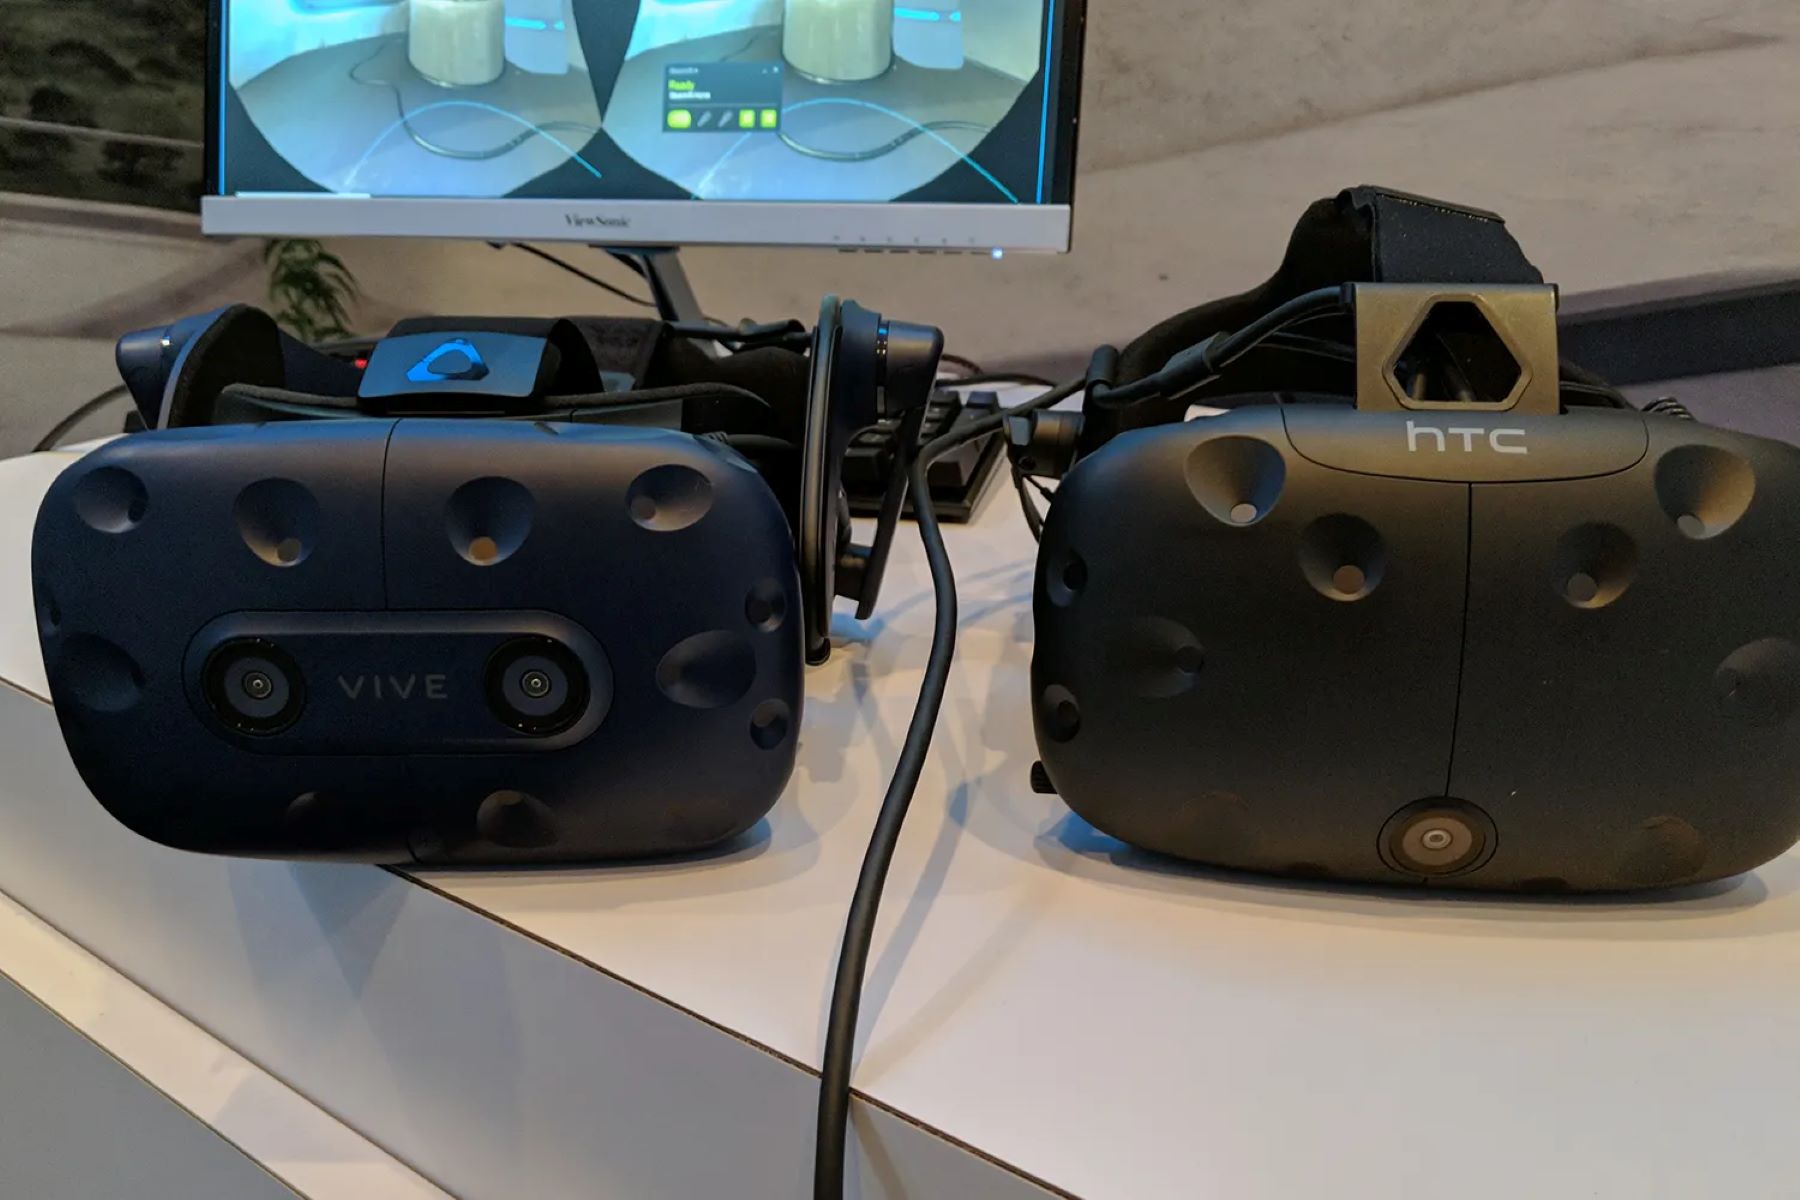 What Is The Difference Between HTC Vive And HTC Vive Pro